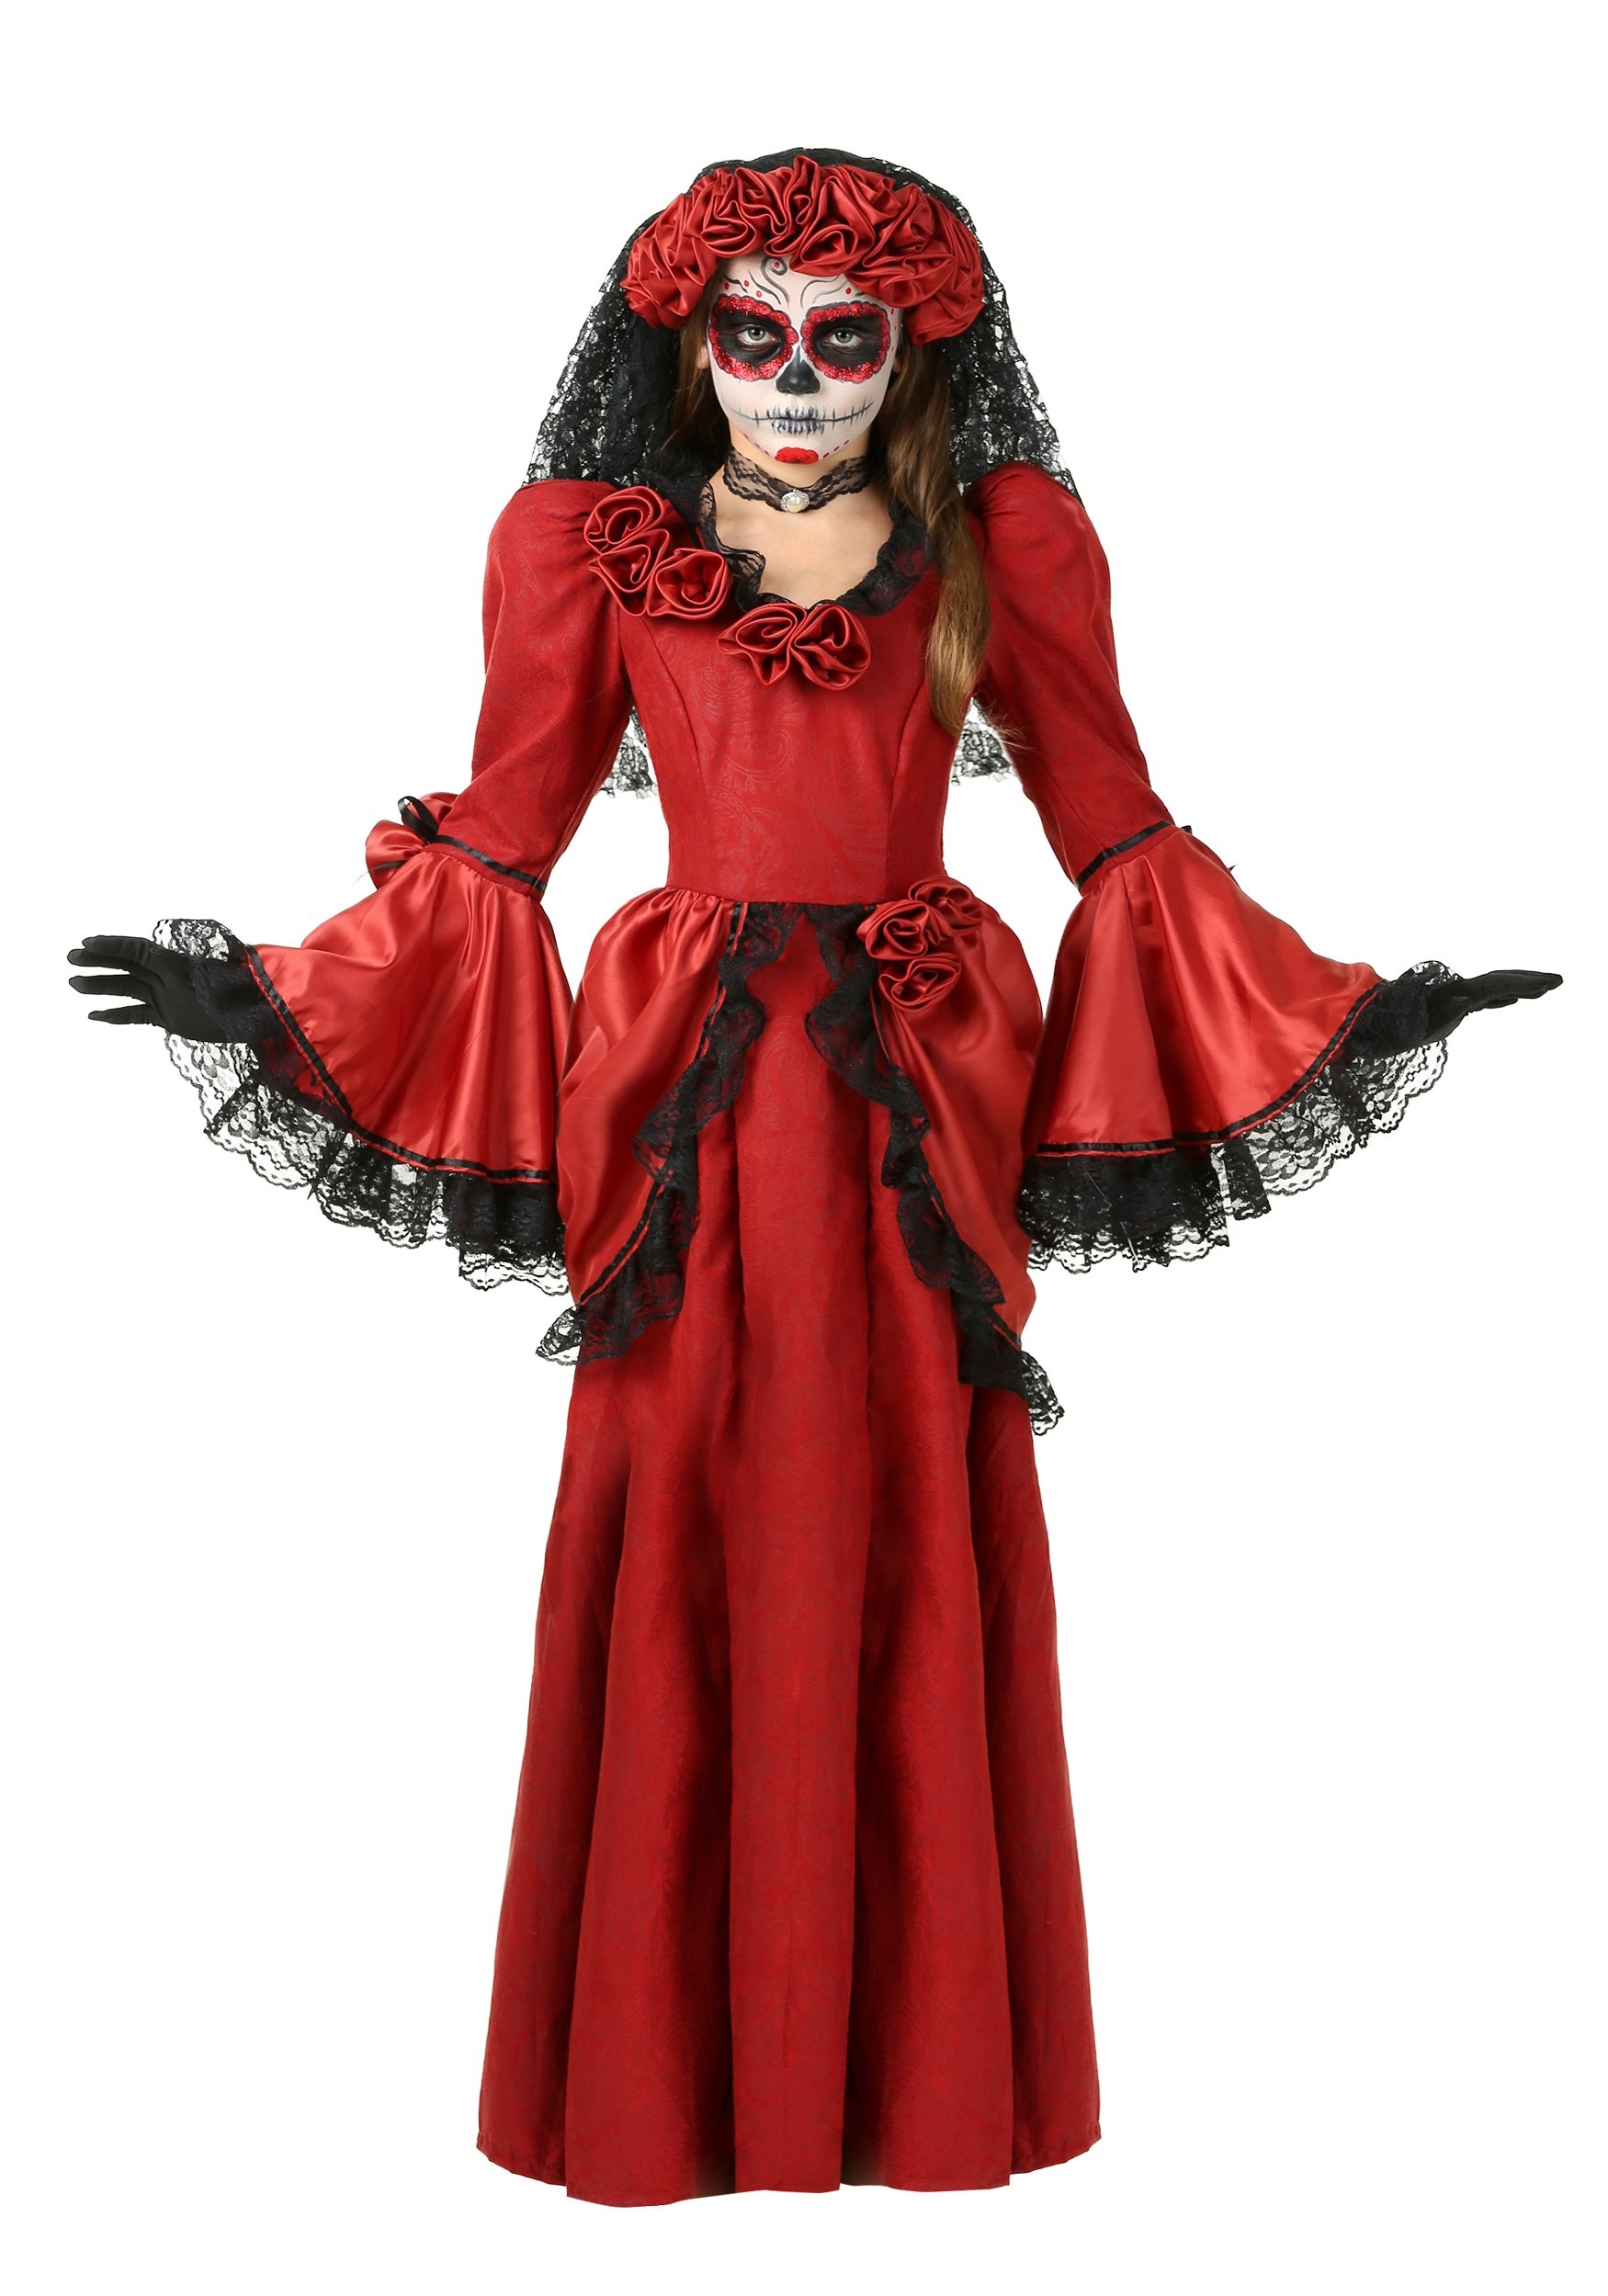 Photos - Fancy Dress FUN Costumes Day of the Dead Costume for Girls Black/Red FUN1156CH